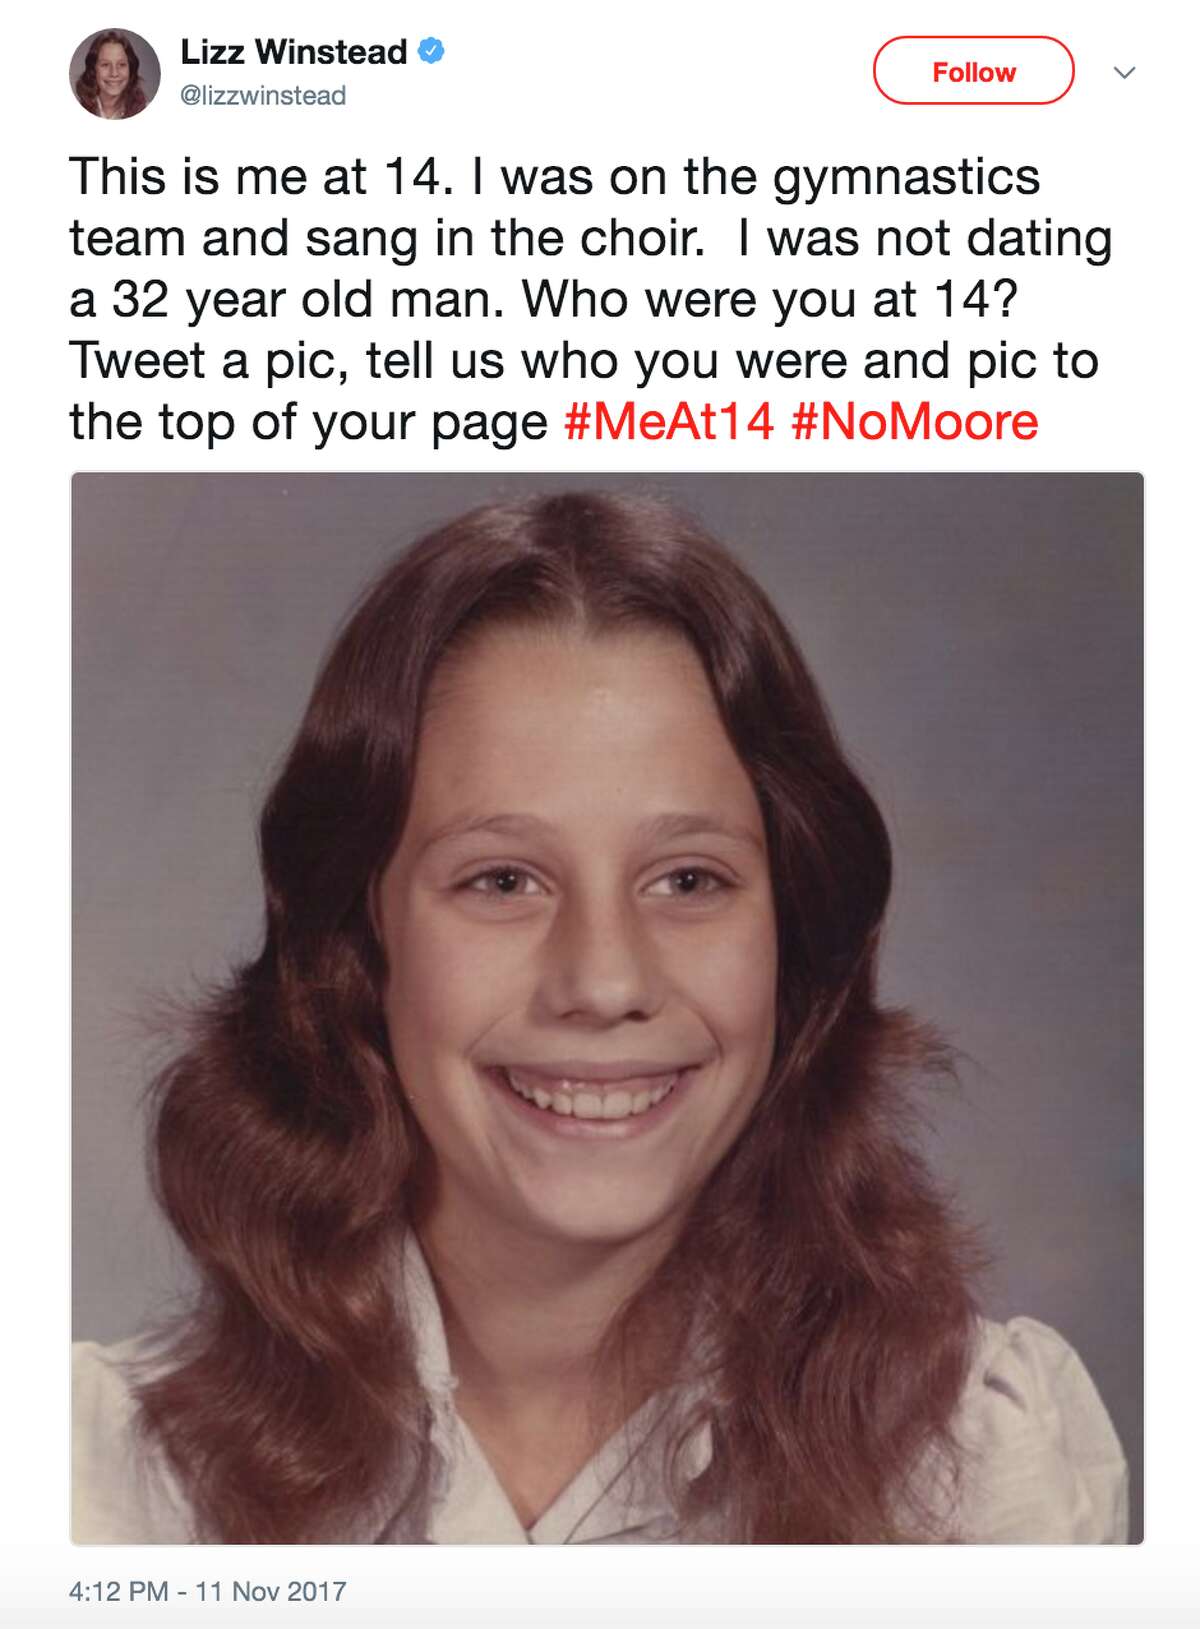 Twitter users post photos of themselves captioned #MeAt14 in response to allegations that Senate candidate Roy Moore dated a 14-year-old girl.